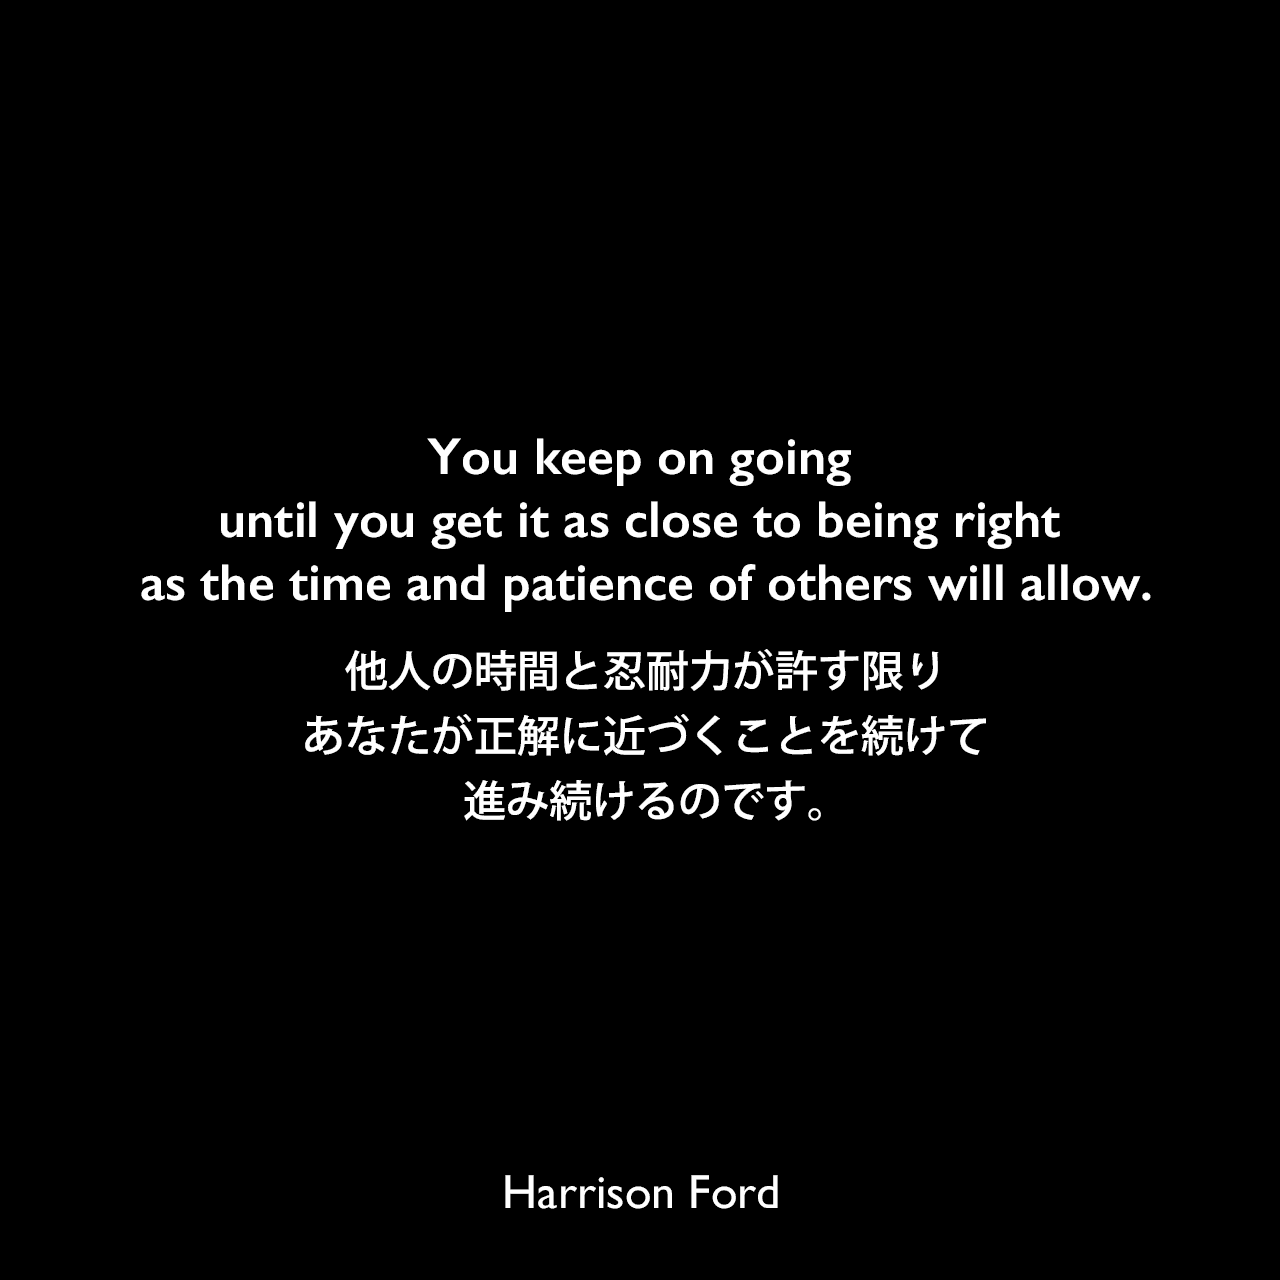 You keep on going until you get it as close to being right as the time and patience of others will allow.他人の時間と忍耐力が許す限り、あなたが正解に近づくことを続けて進み続けるのです。